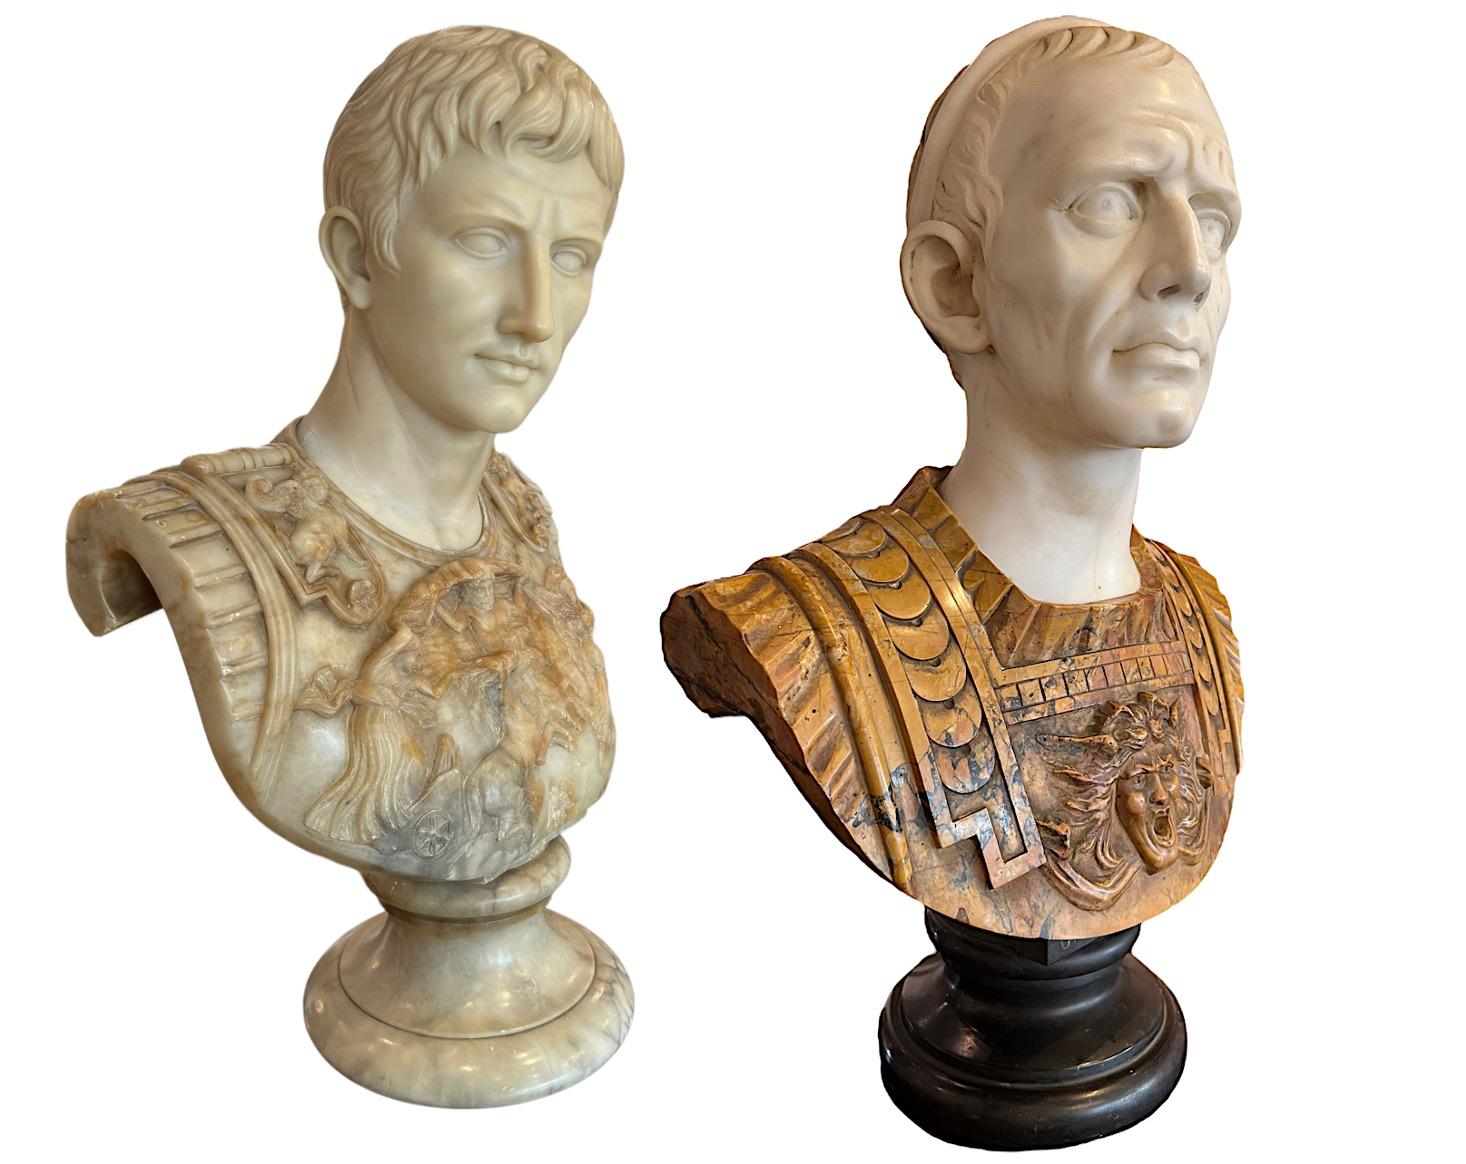 A pair 19th century (1850s) (Grand Tour) Italian carved multi-marble busts of Augustus of Prima Porta and Julius Cesar. These extremely fine and detailed busts display a richly carved marble armor with wonderful intricacy. These powerful and